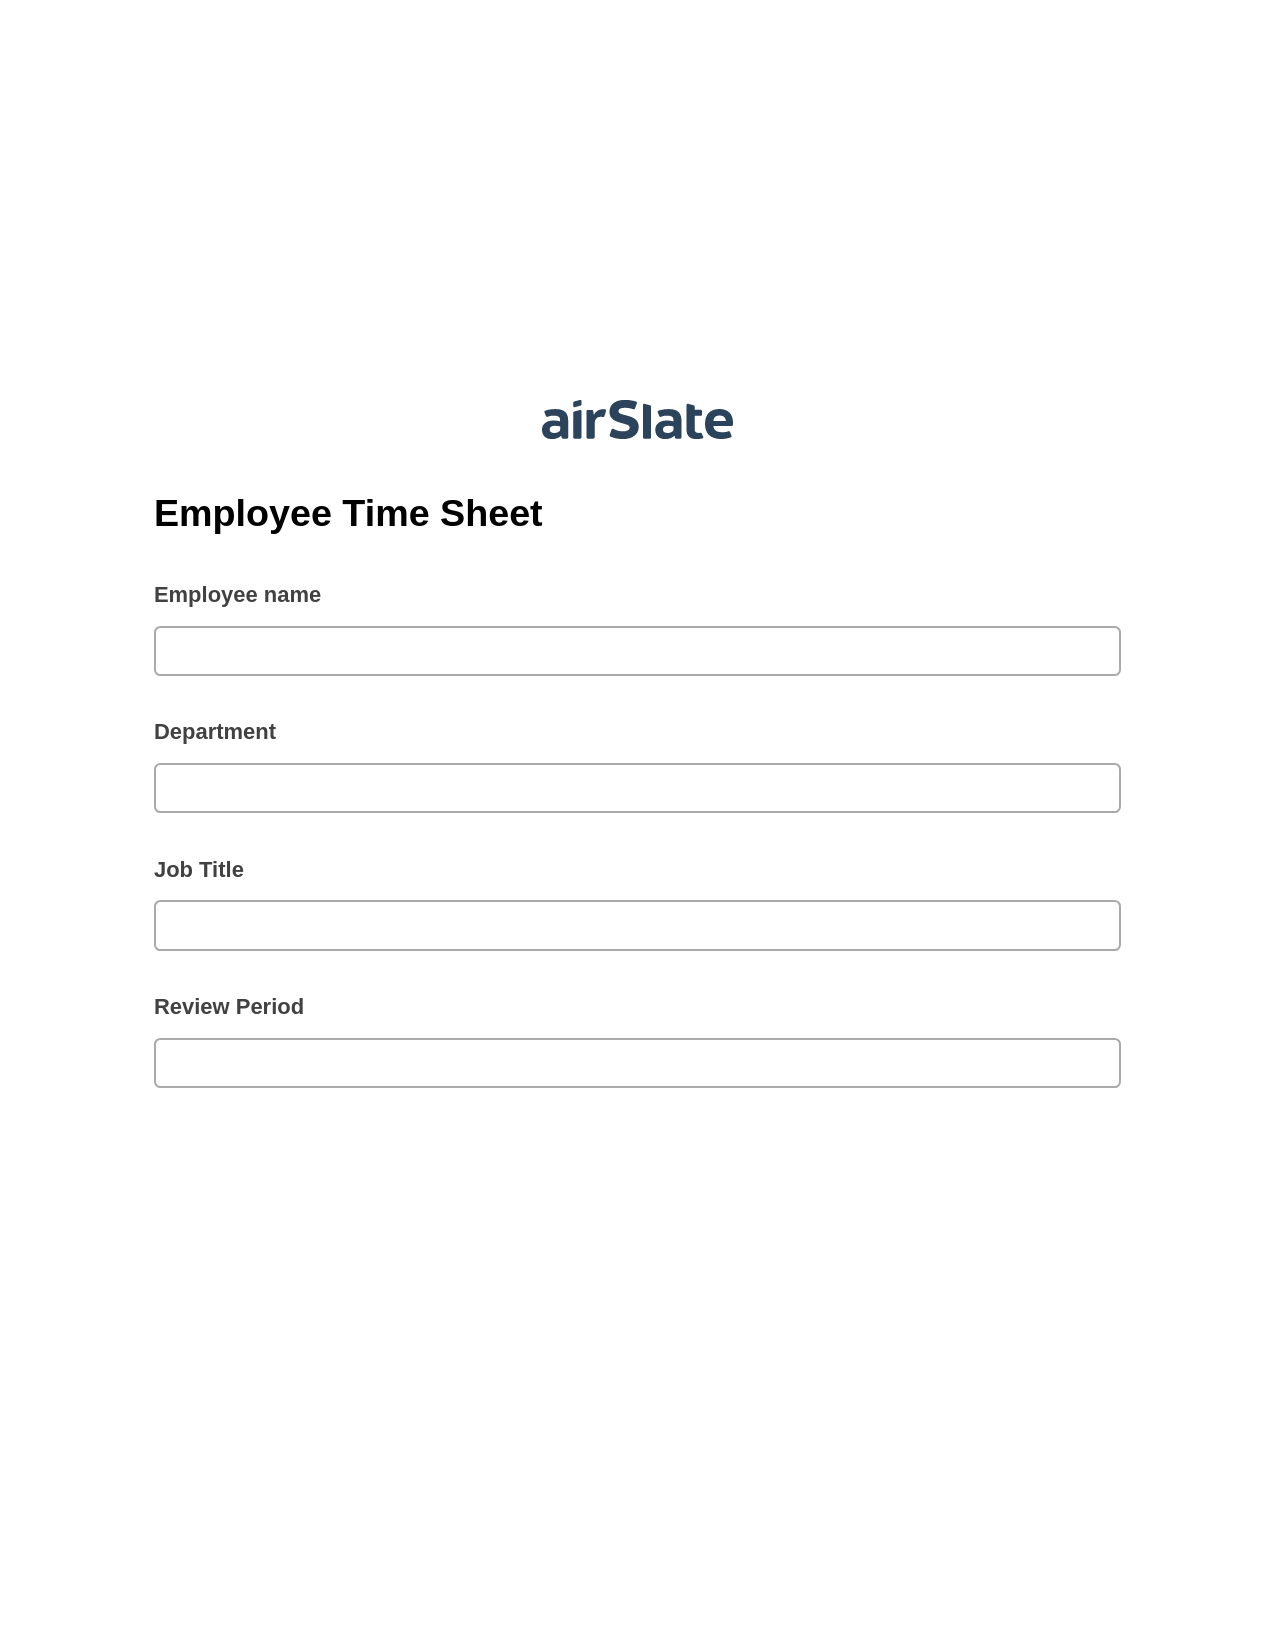 Employee Time Sheet Pre-fill from another Slate Bot, Create slate addon, Archive to OneDrive Bot